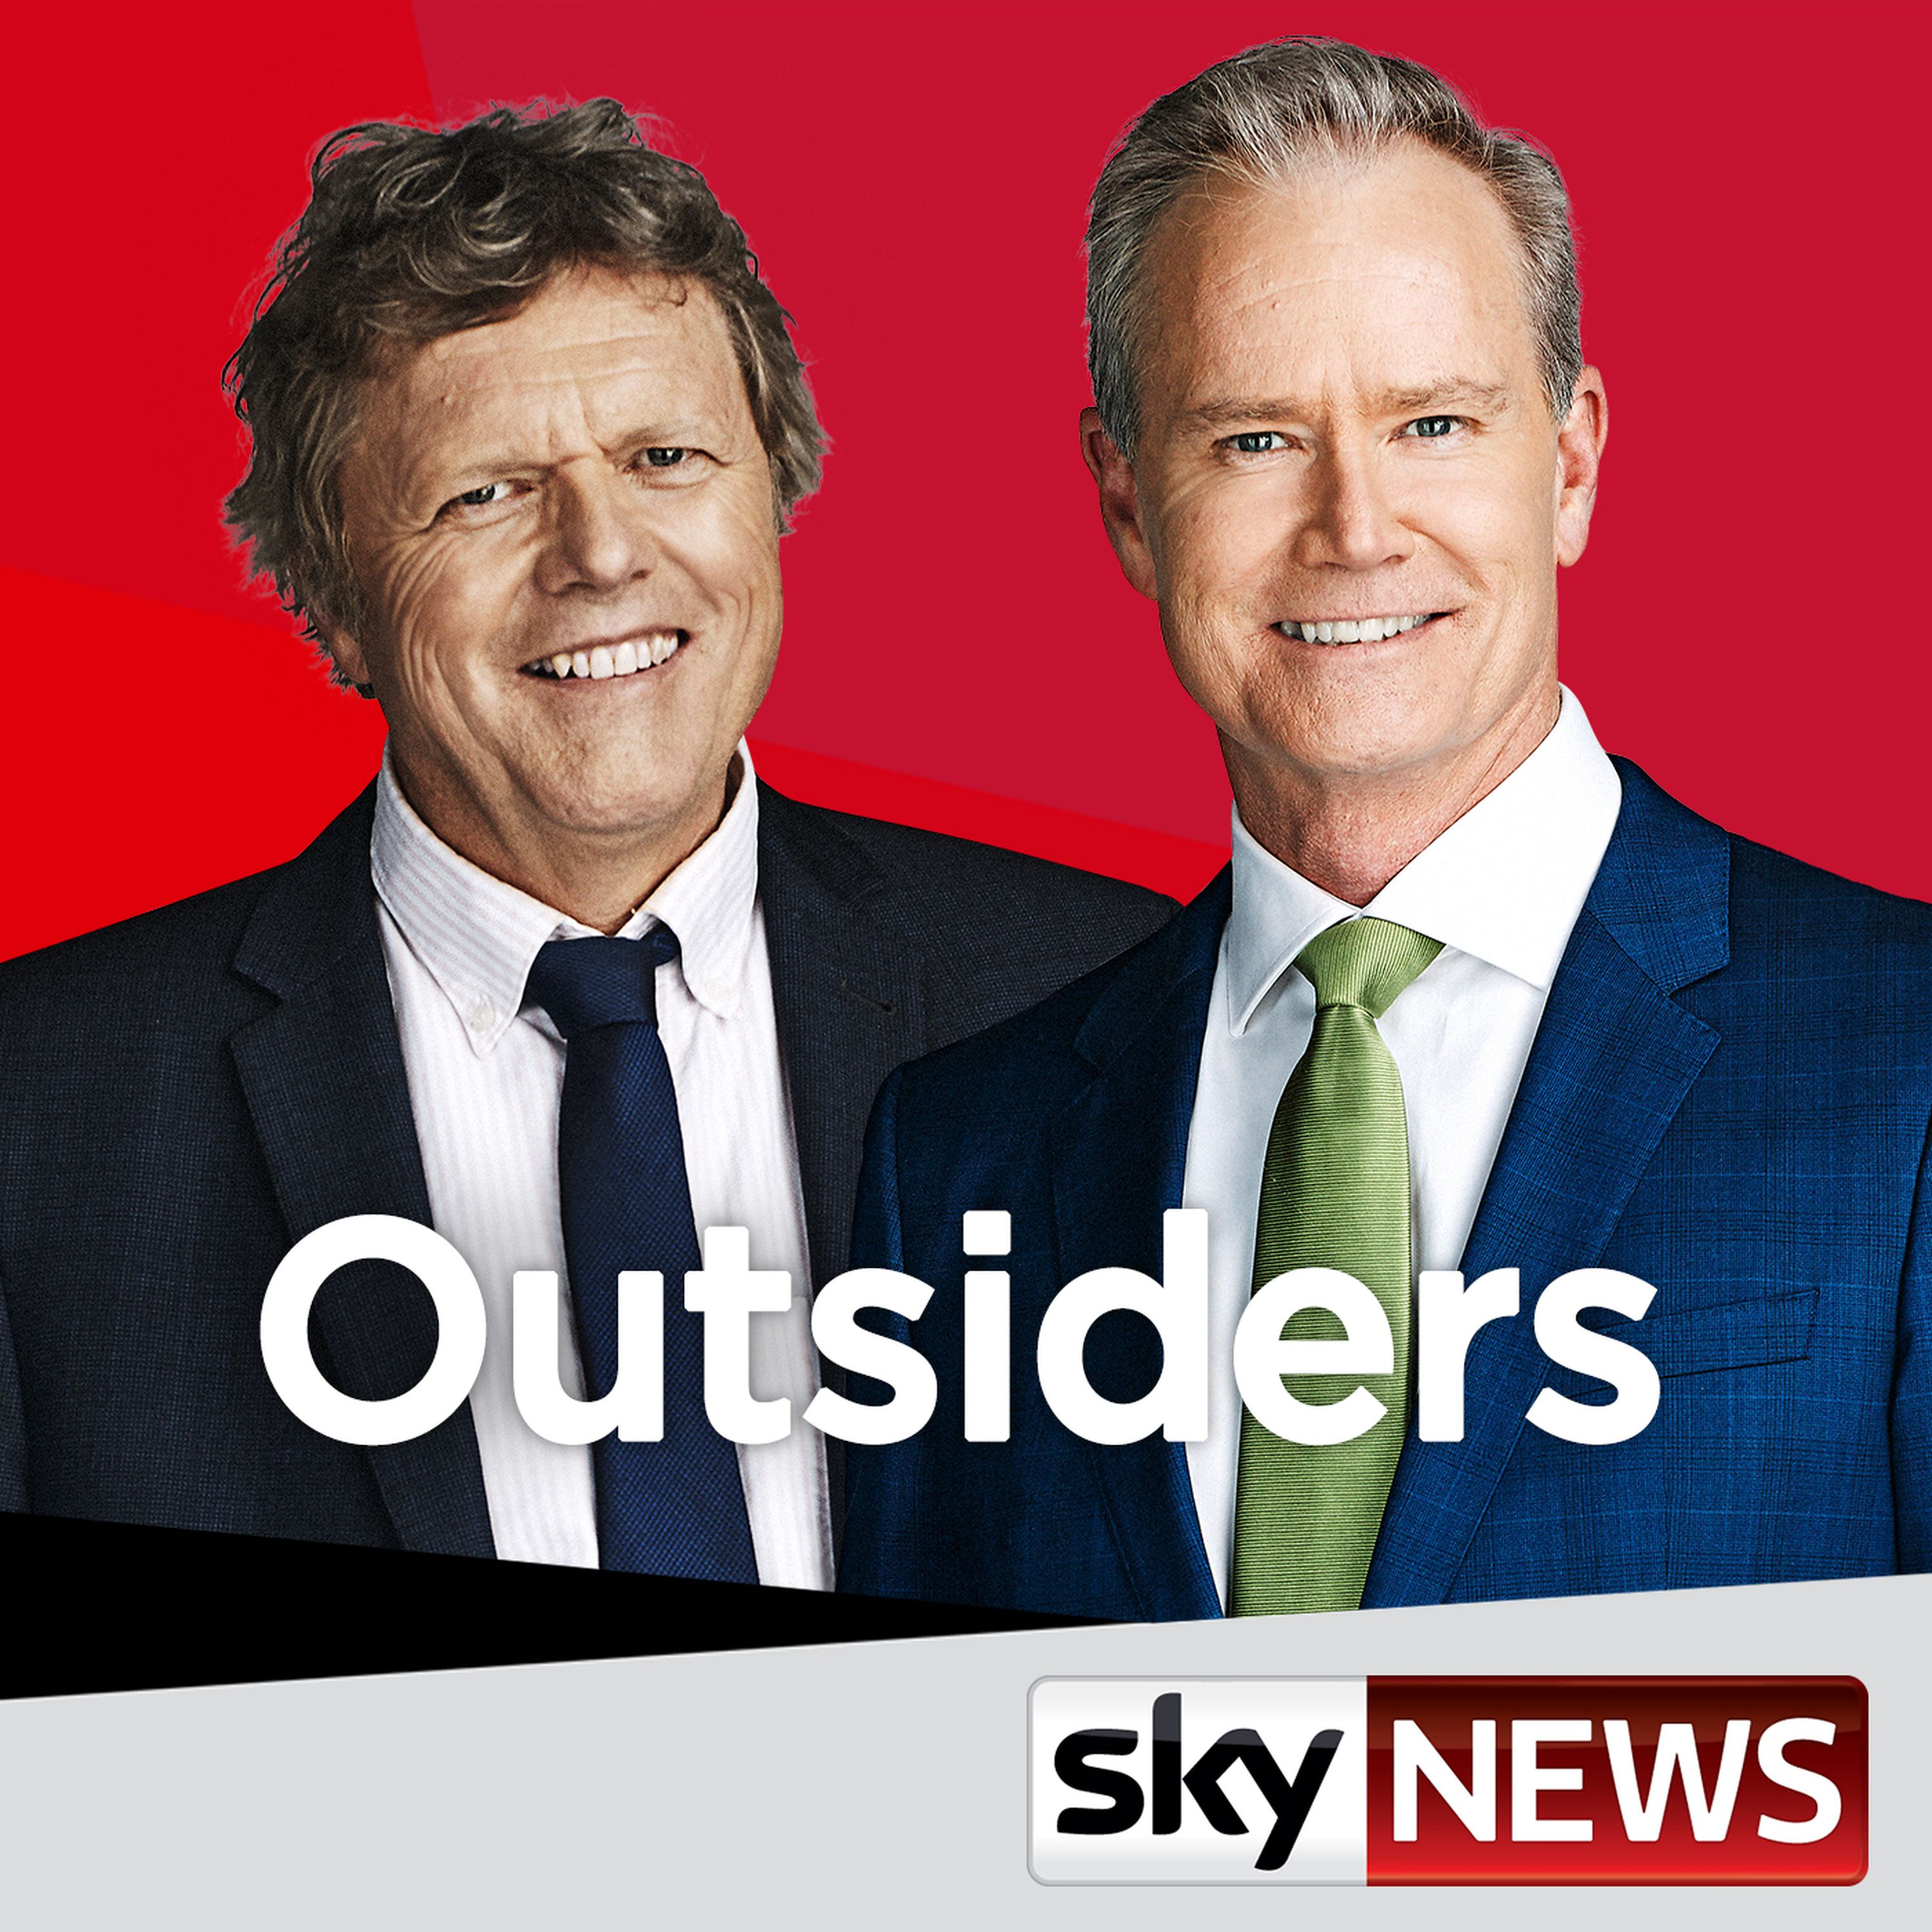 Outsiders, Sunday 14th October